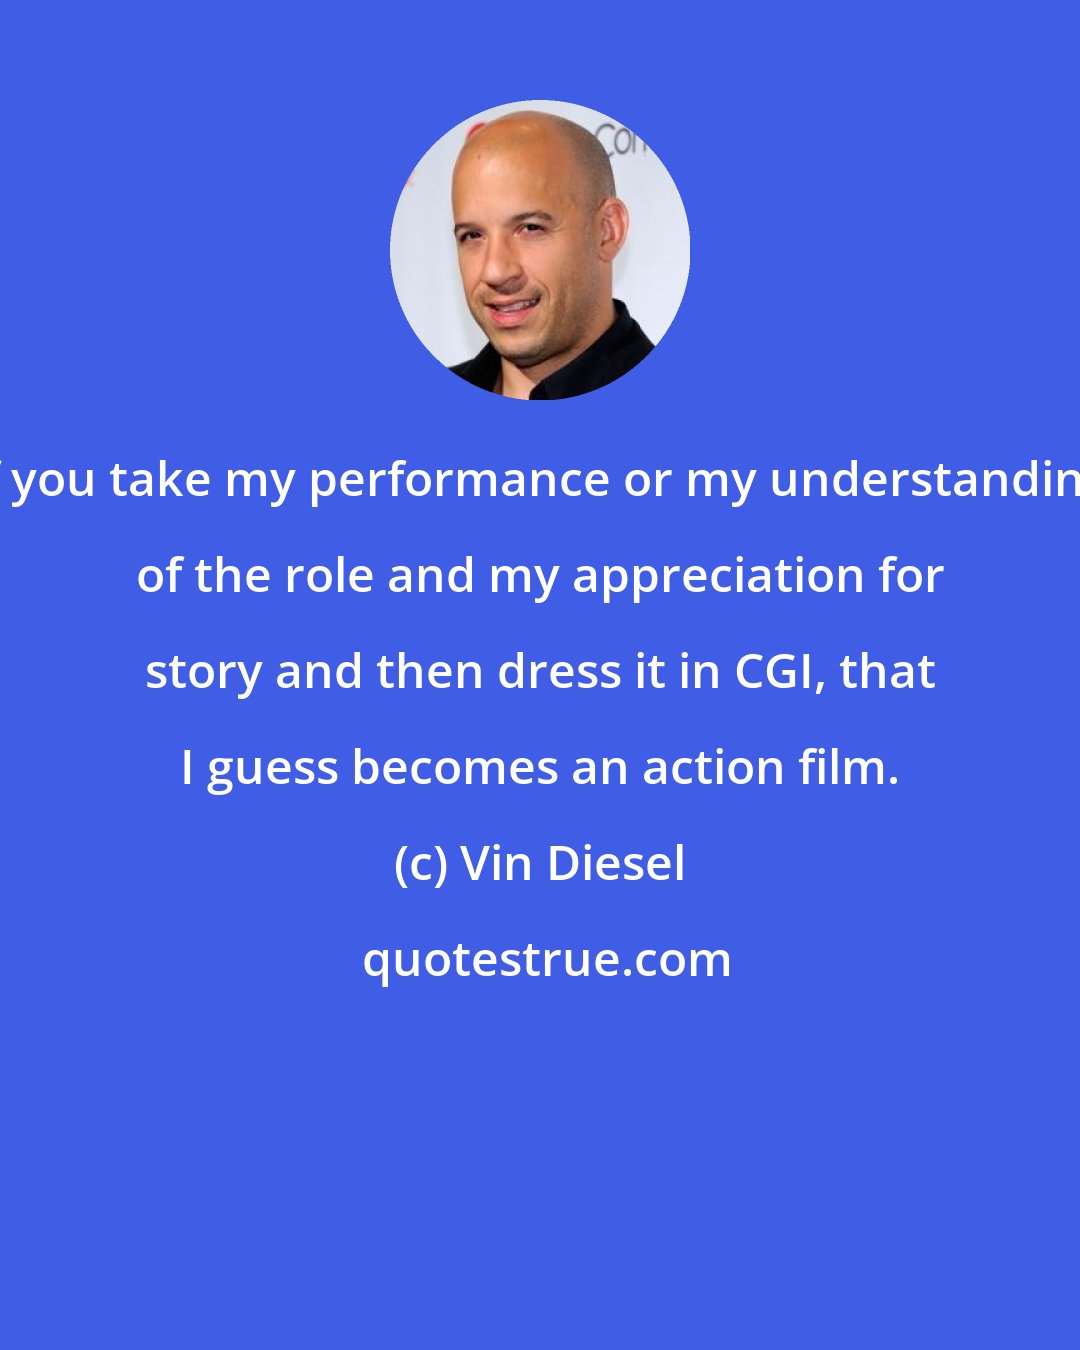 Vin Diesel: If you take my performance or my understanding of the role and my appreciation for story and then dress it in CGI, that I guess becomes an action film.